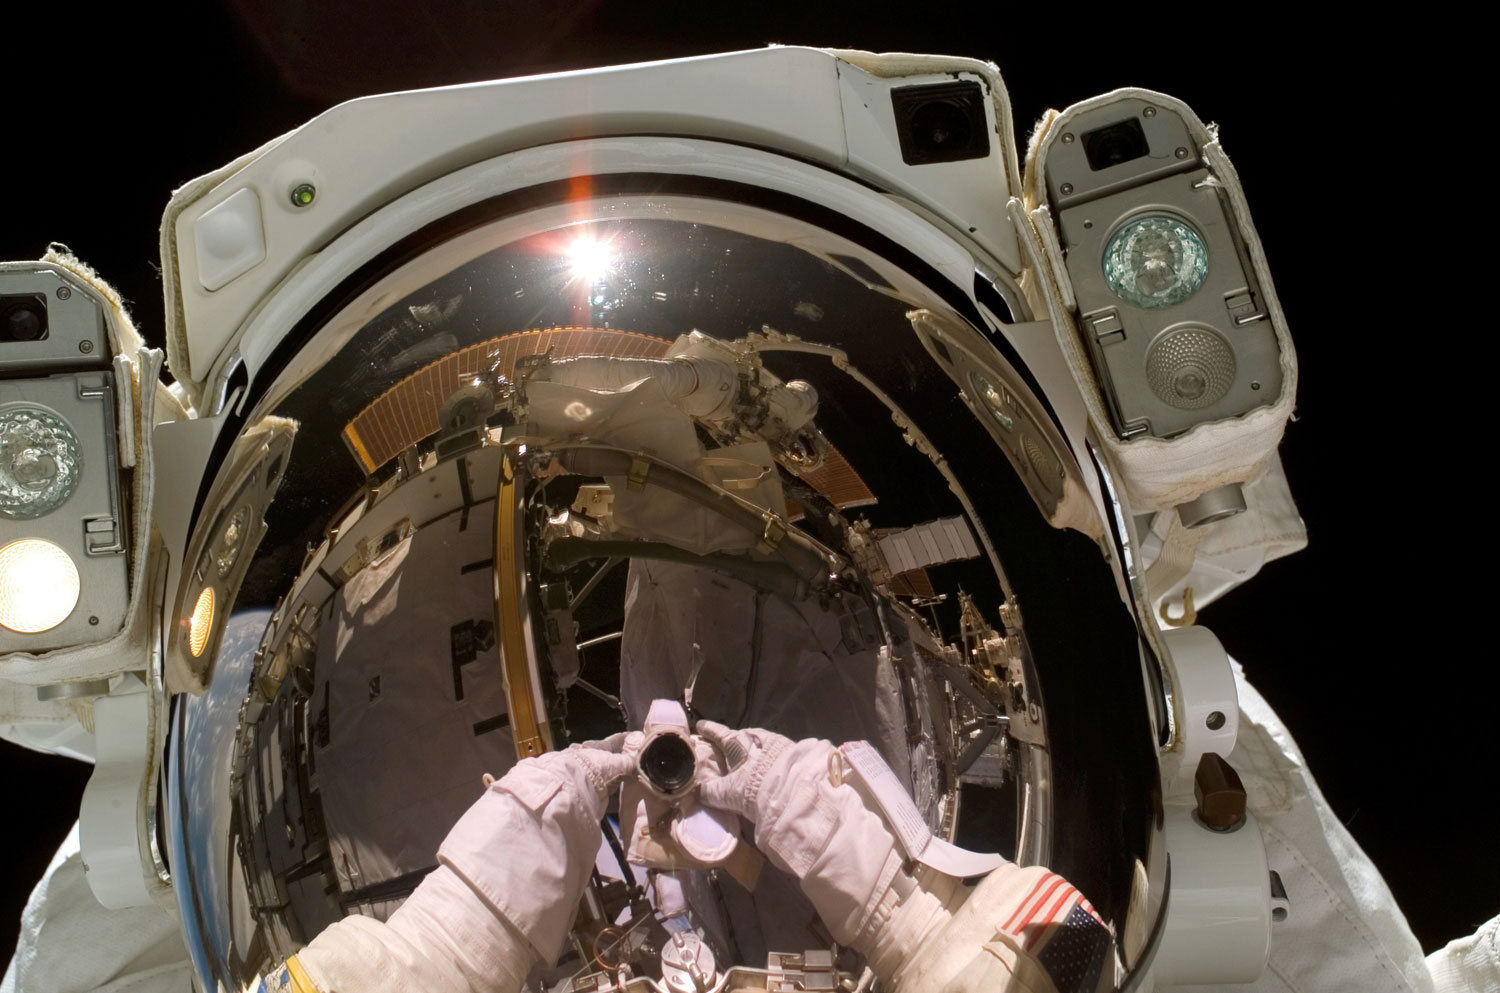 NASA astronaut Heidemarie M. Stefanyshyn-Piper, STS-115 mission specialist, takes a self-portrait during a space walk, on Sept. 12, 2006.